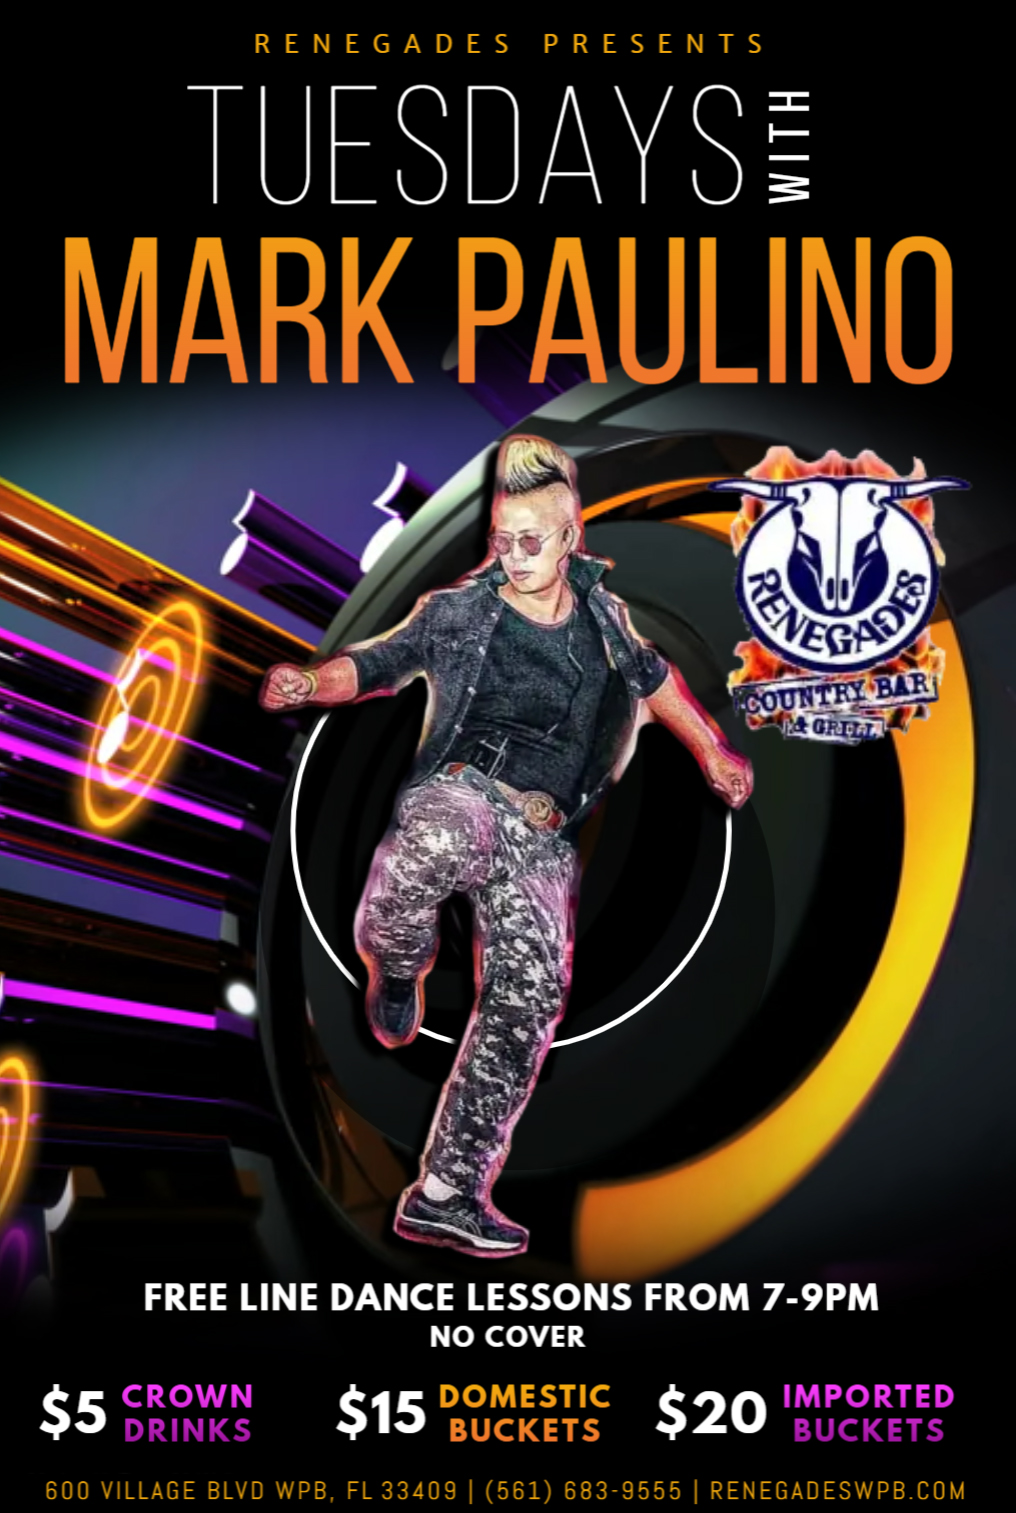 Tuesday's with Mark Paulino at Renegades - West Palm Beach